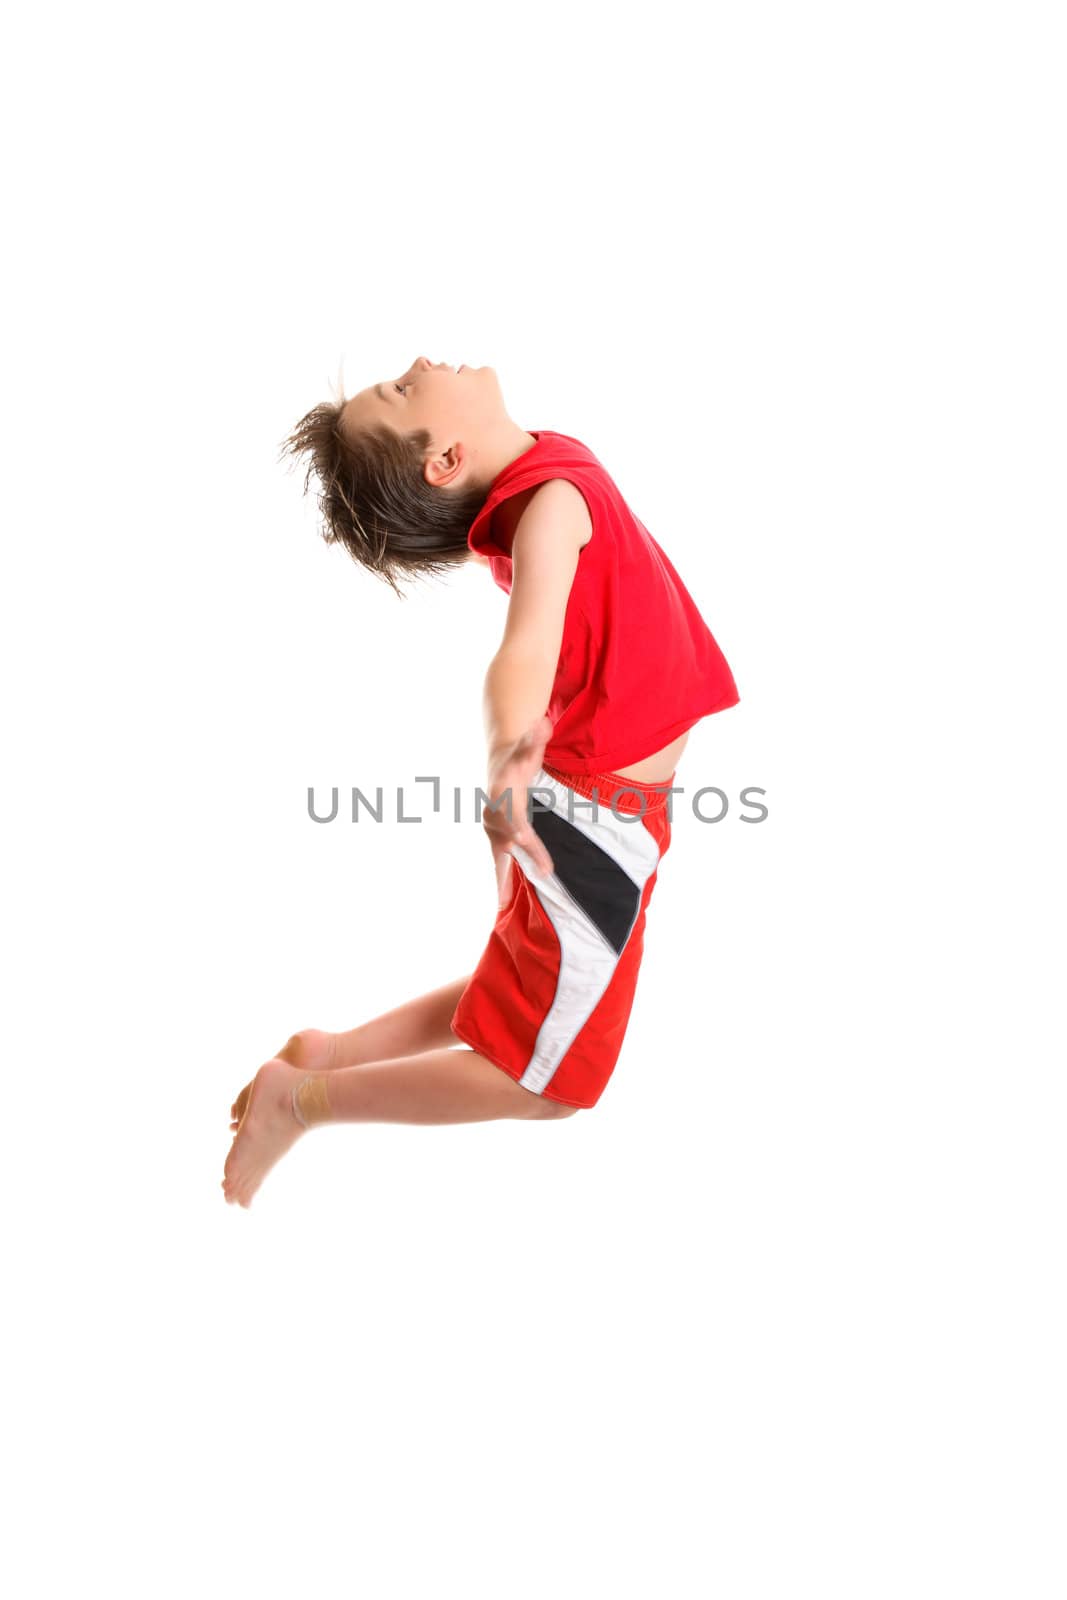 boy jumpging arms outstretched by lovleah